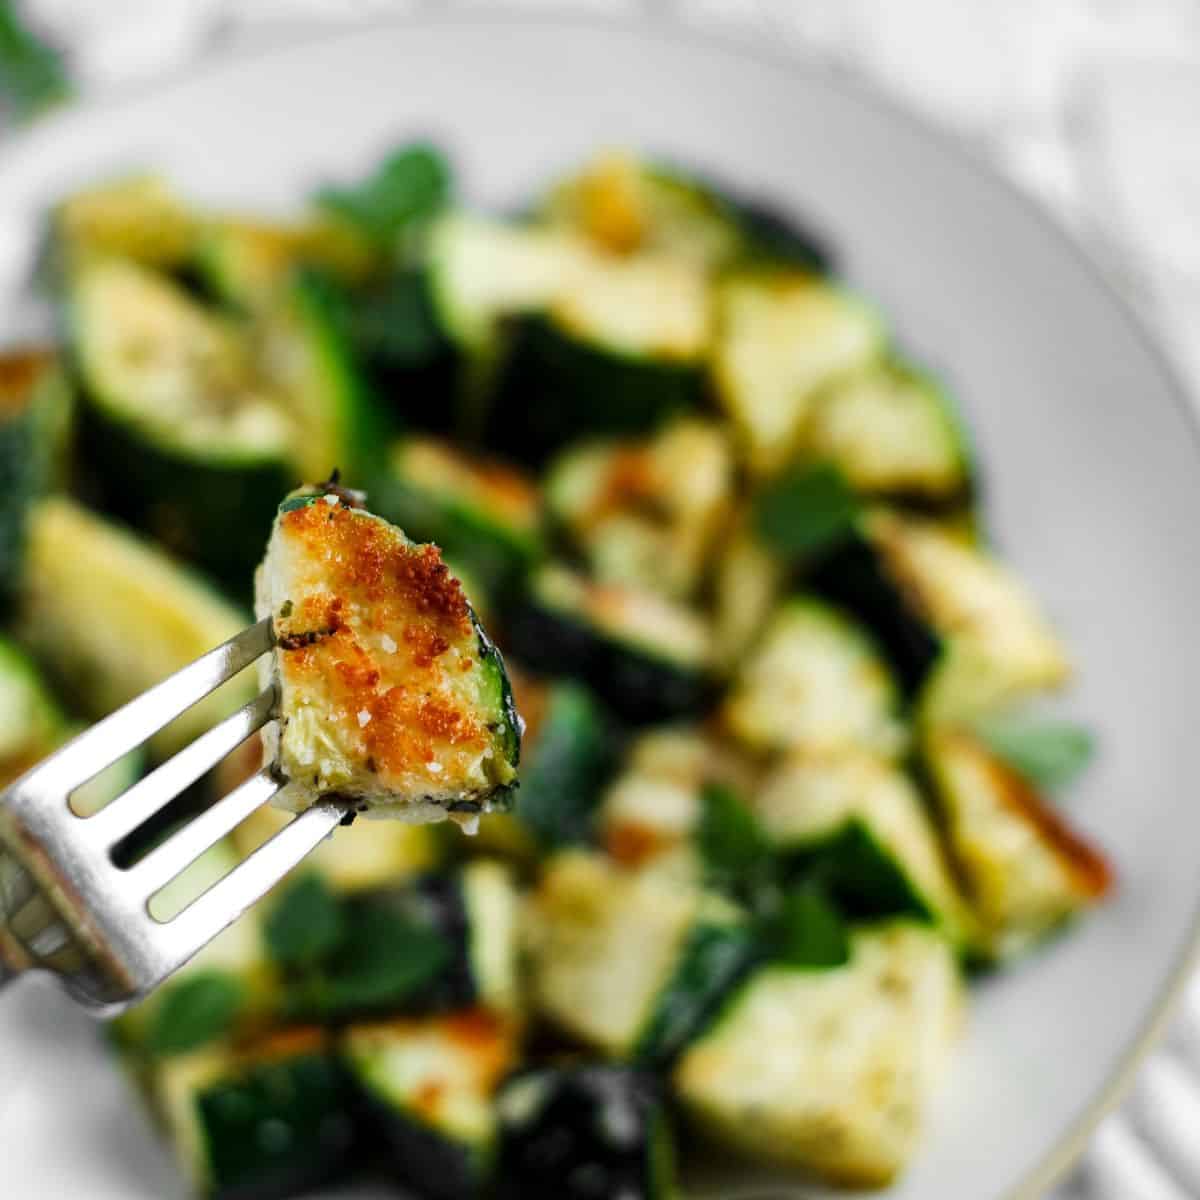 Roasted zucchini in a fork.